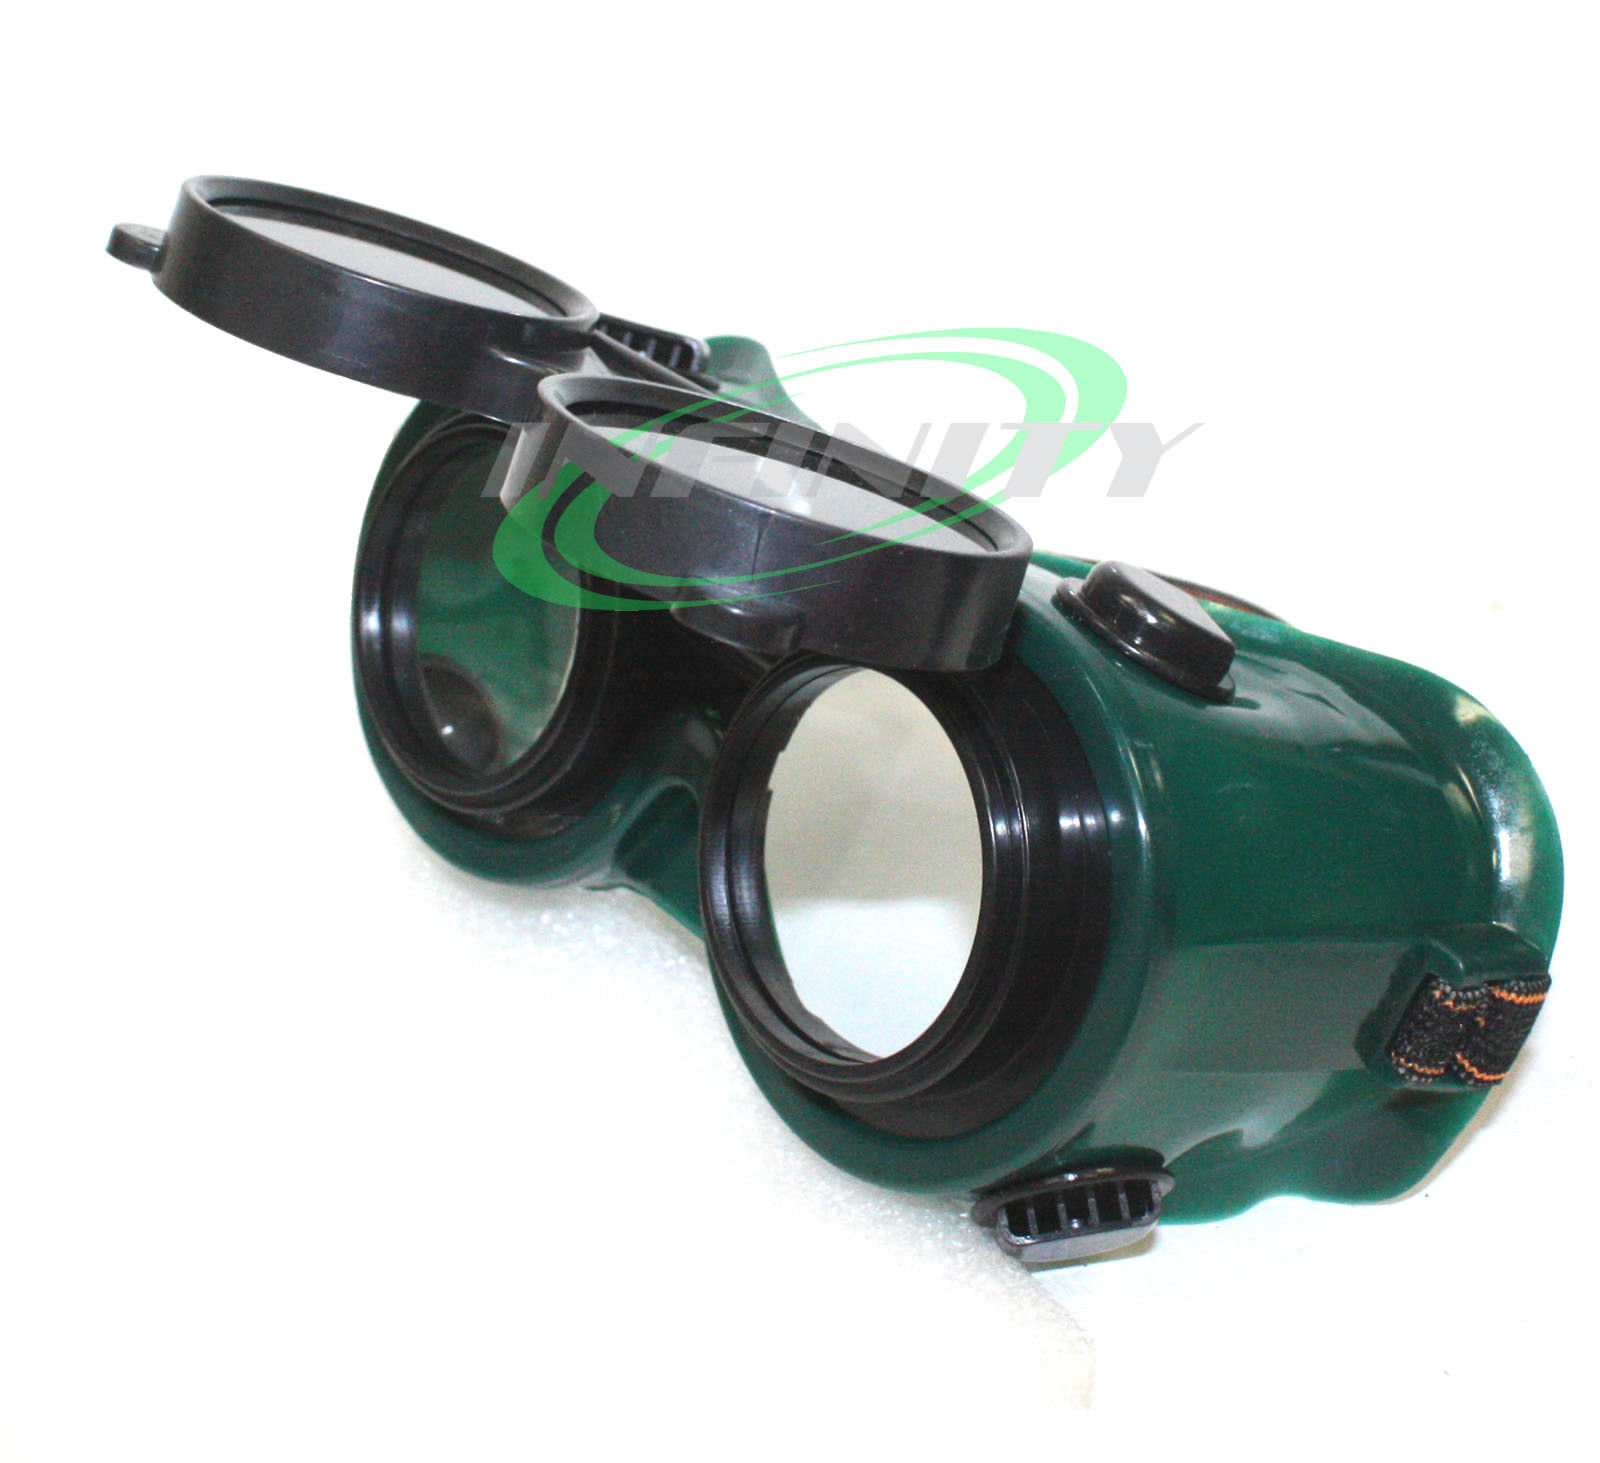 Welding Goggles With Flip Up Glasses for Cutting Grinding Oxy Acetilene torch